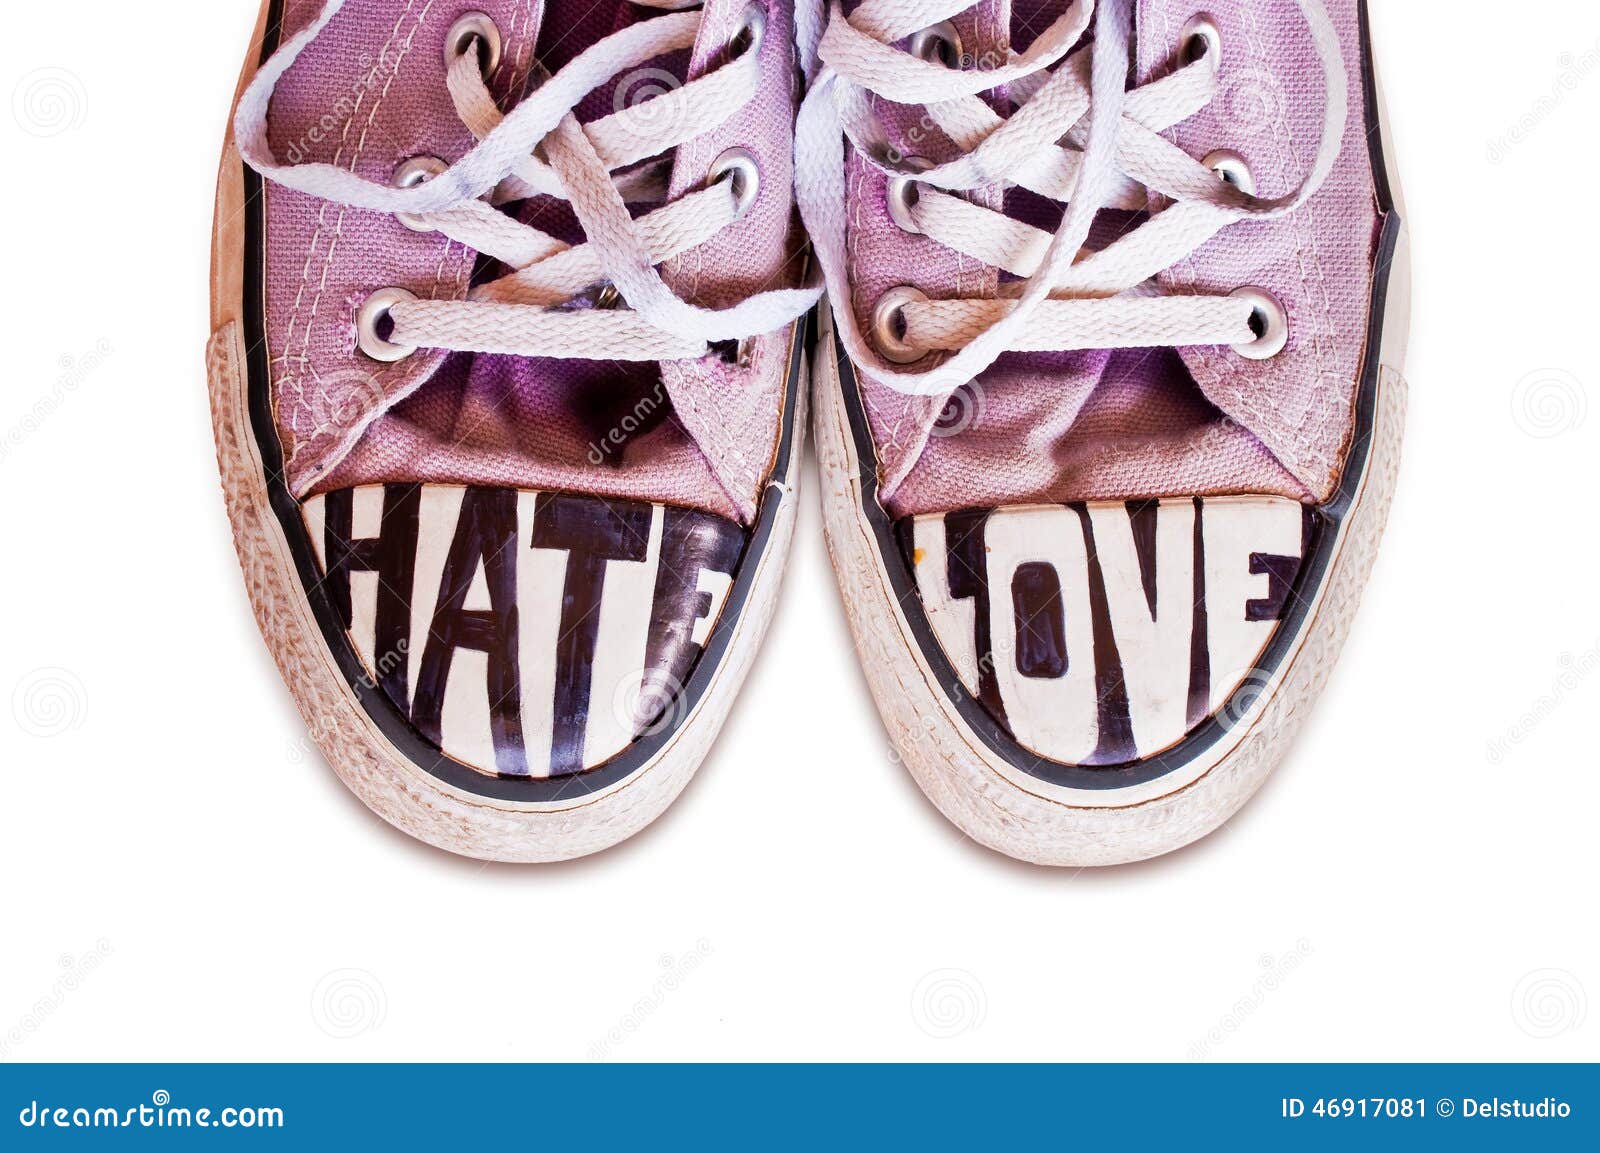 customized used pink sneakers with words hate and love